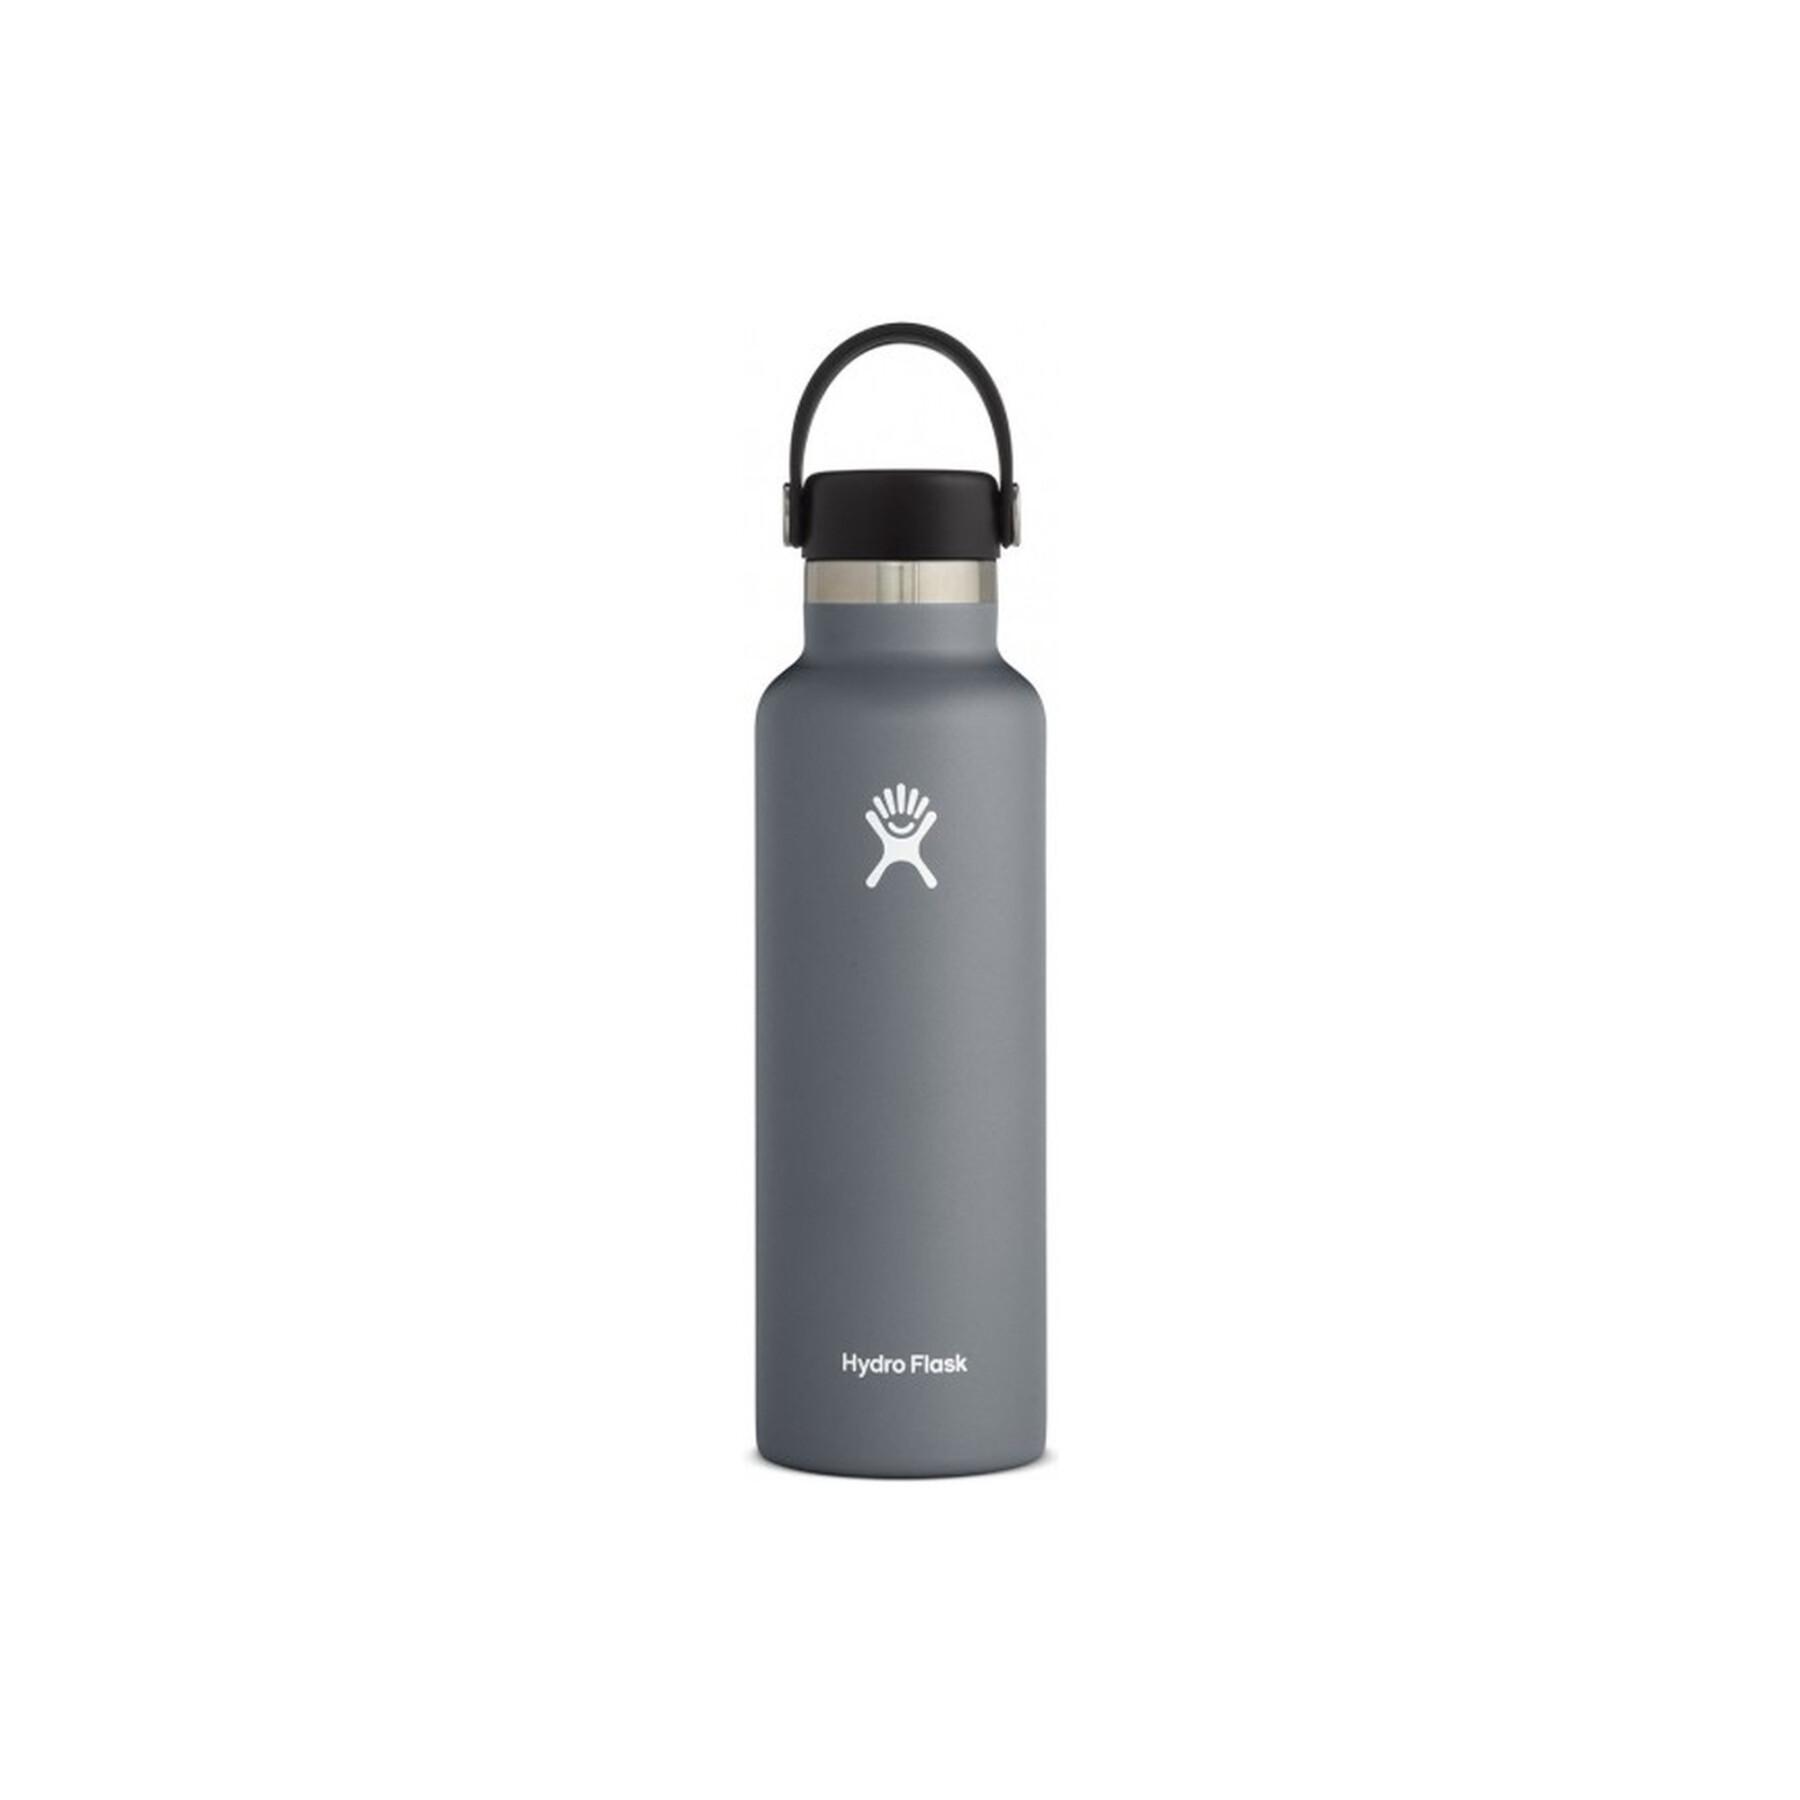 Standard-Thermoskanne Hydro Flask with standard mouth flew cap 21 oz